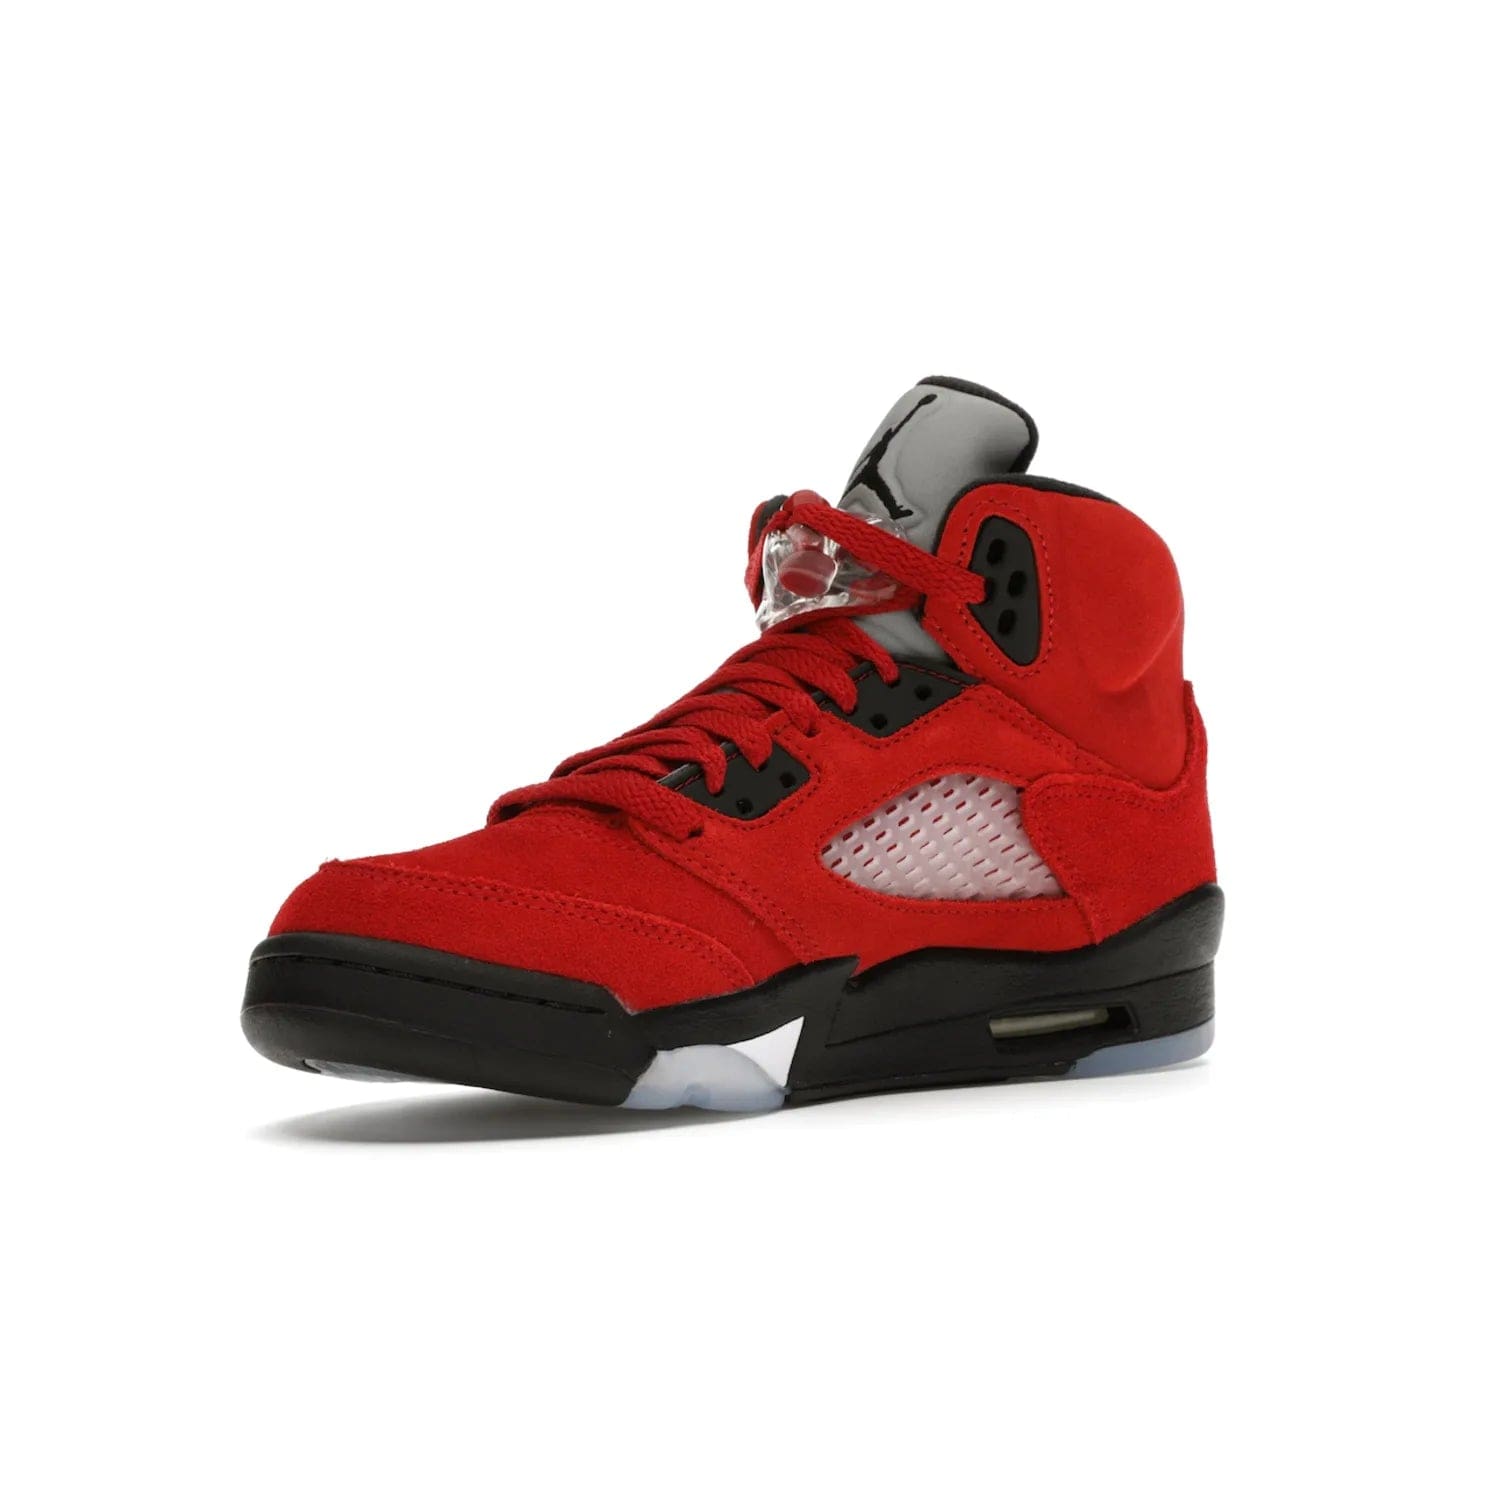 Jordan 5 Retro Raging Bull Red (2021) (GS) - Image 15 - Only at www.BallersClubKickz.com - Jordan 5 Retro Raging Bulls Red 2021 GS. Varsity Red suede upper with embroidered number 23, black leather detail, red laces, and midsole with air cushioning. Jumpman logos on tongue, heel, and outsole. On-trend streetwear and basketball style. Released April 10, 2021.